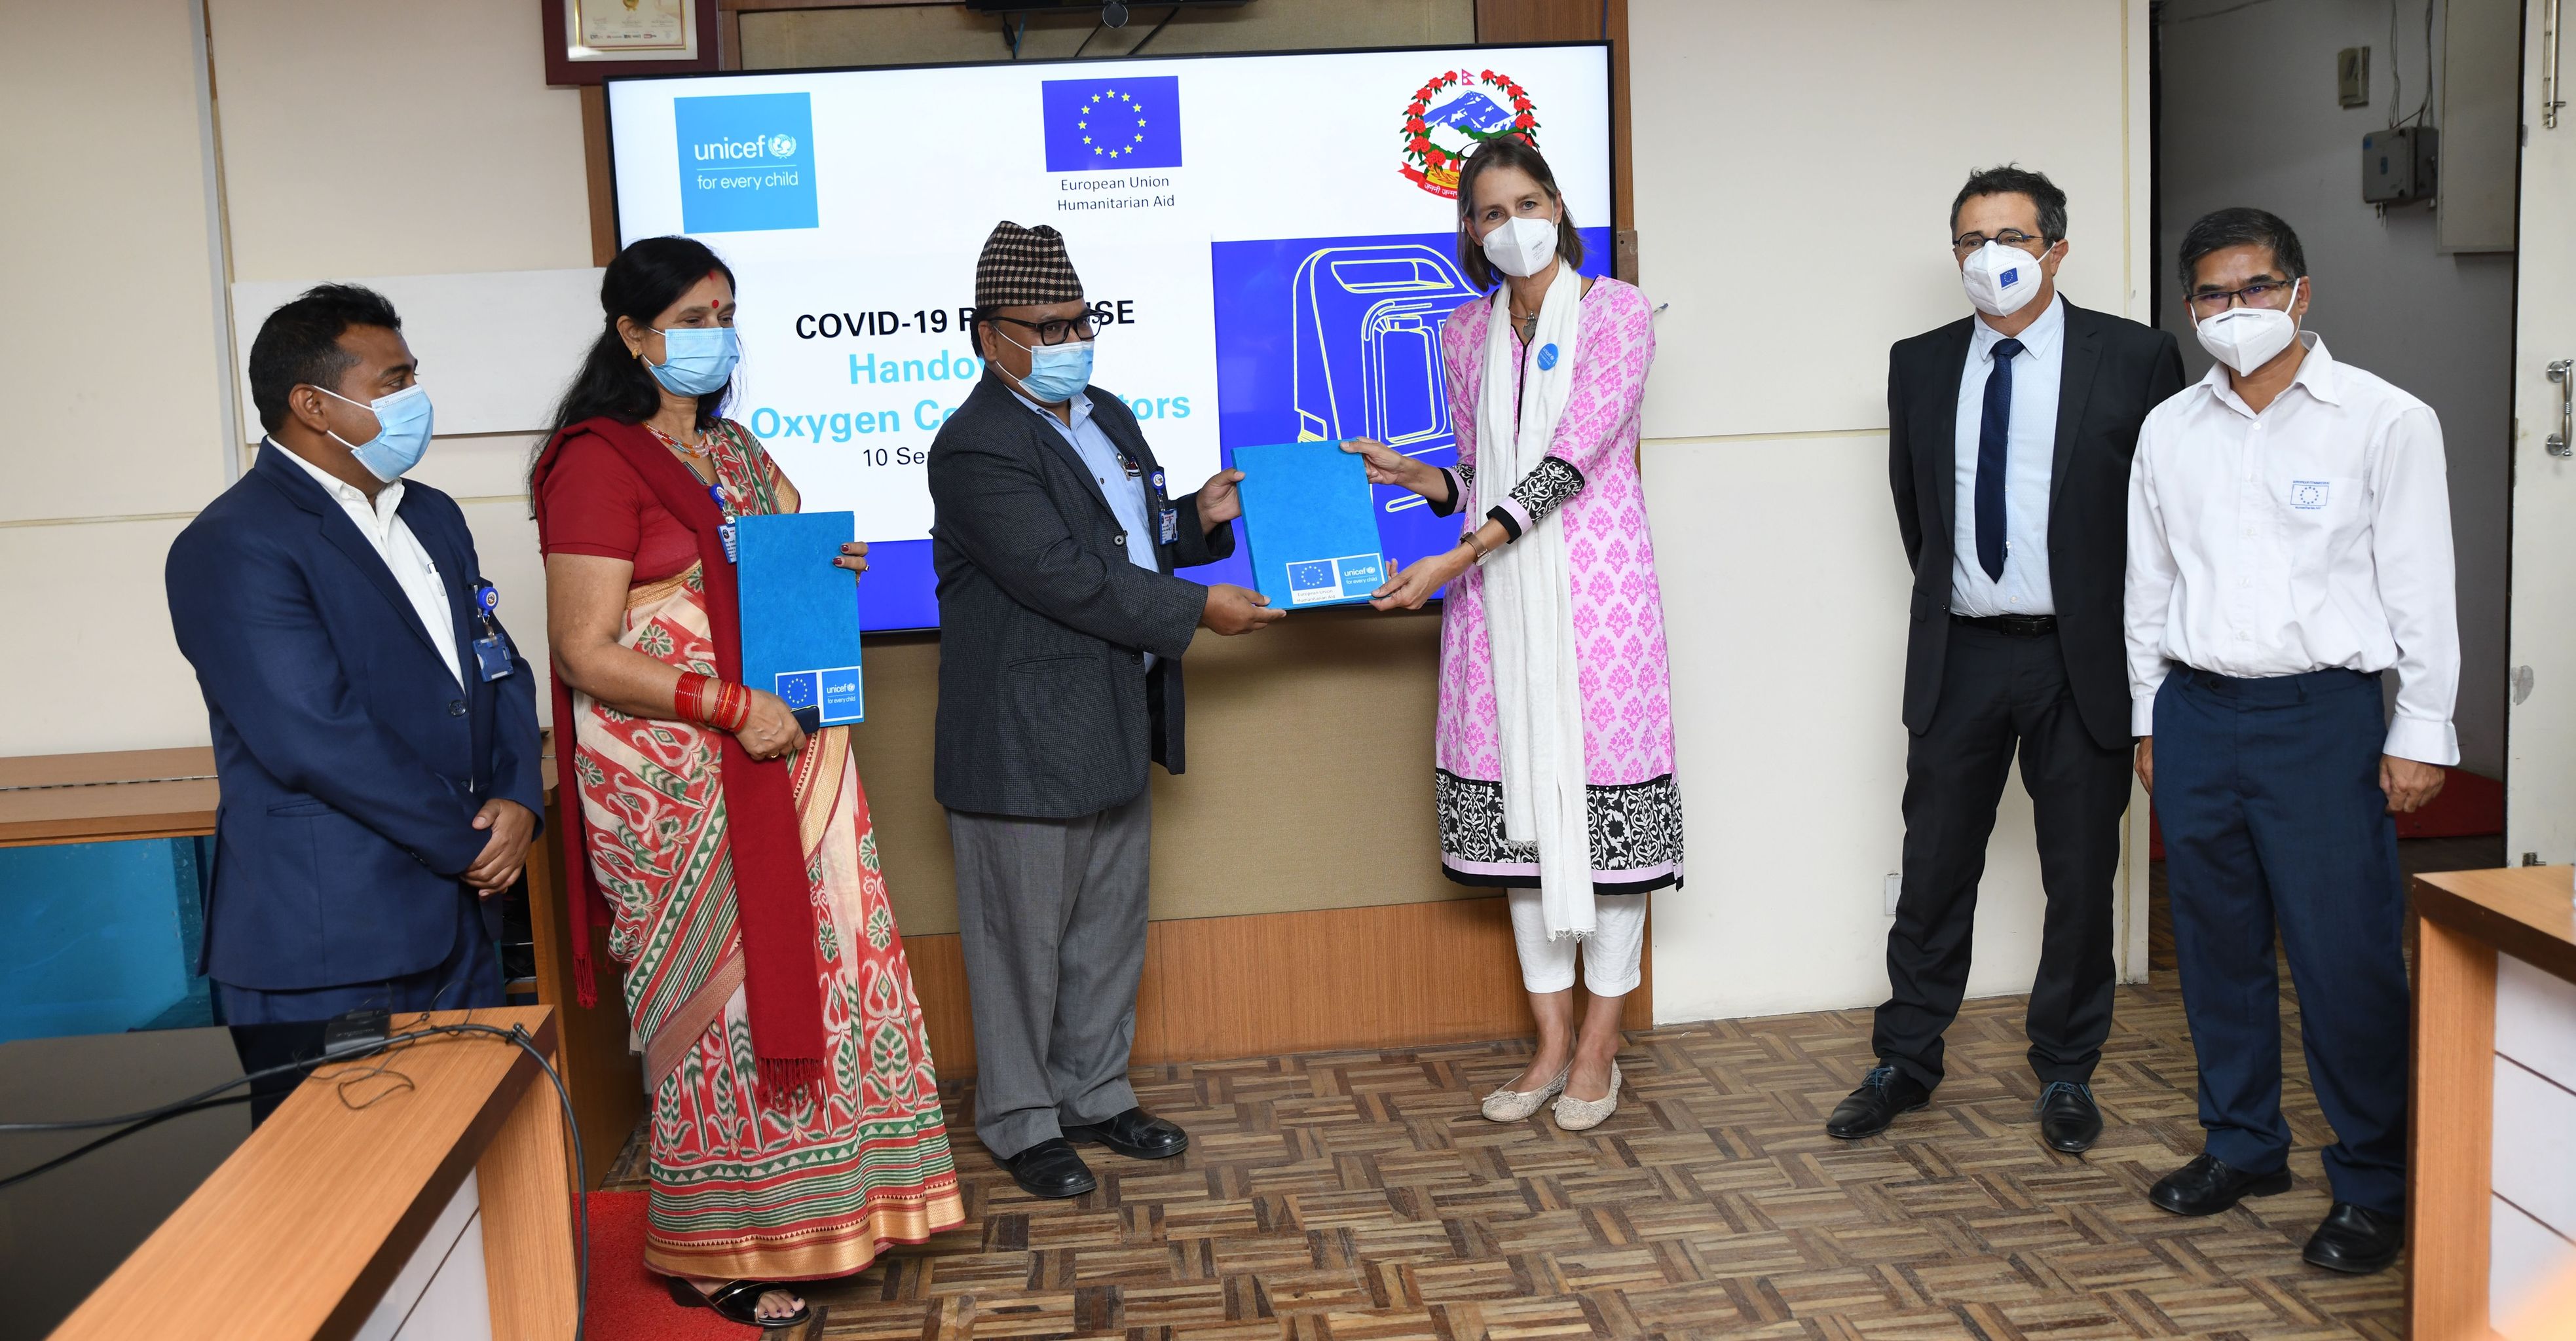 UNICEF hands over life-saving oxygen concentrators